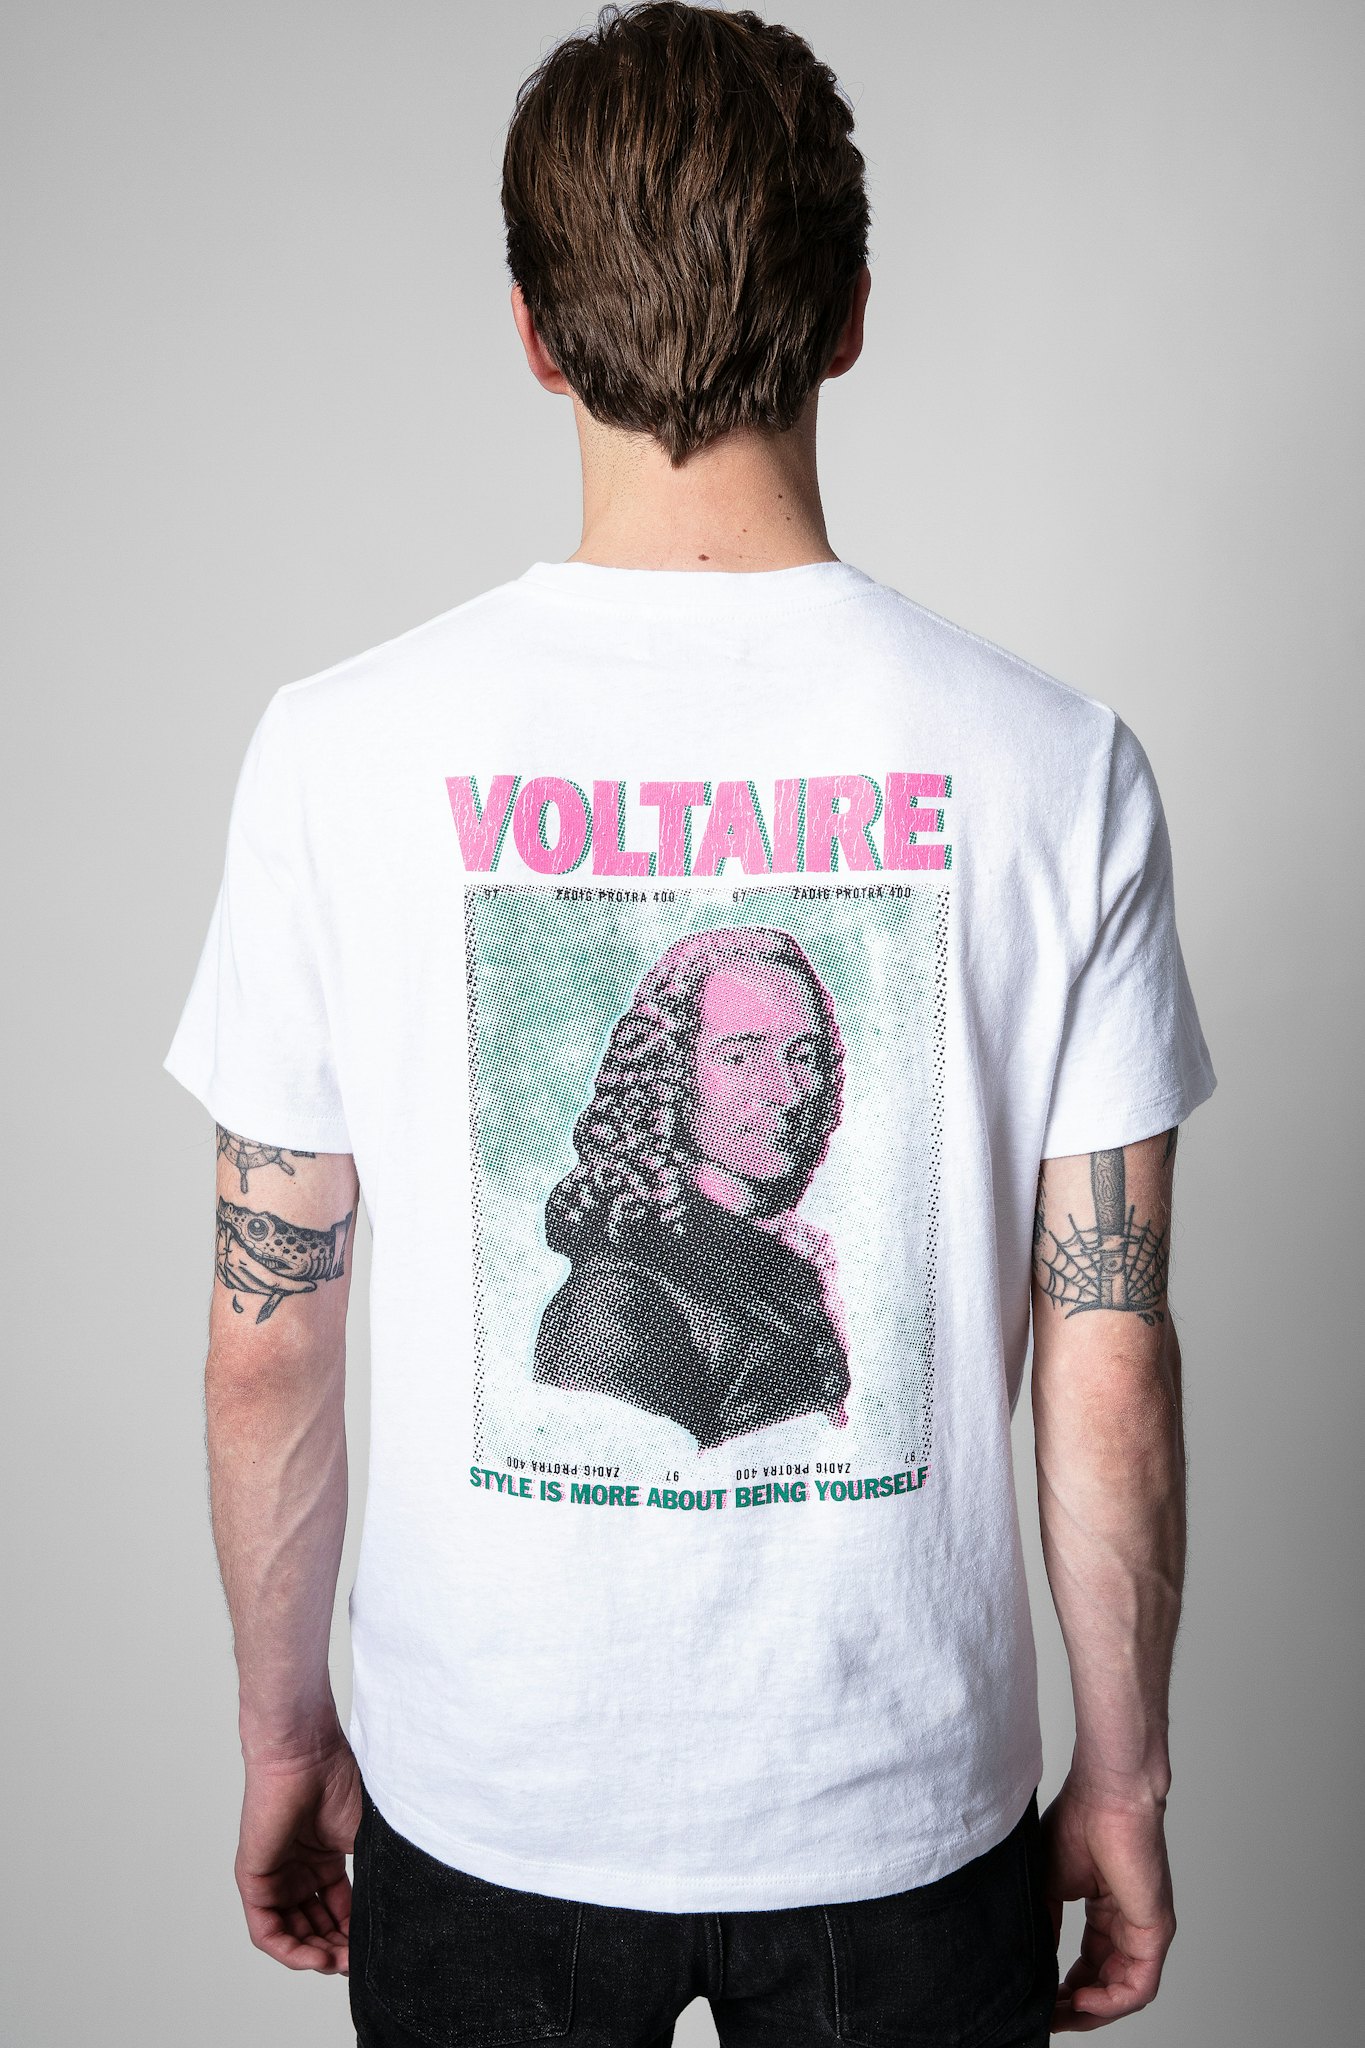 Ted Voltaire T-shirt 